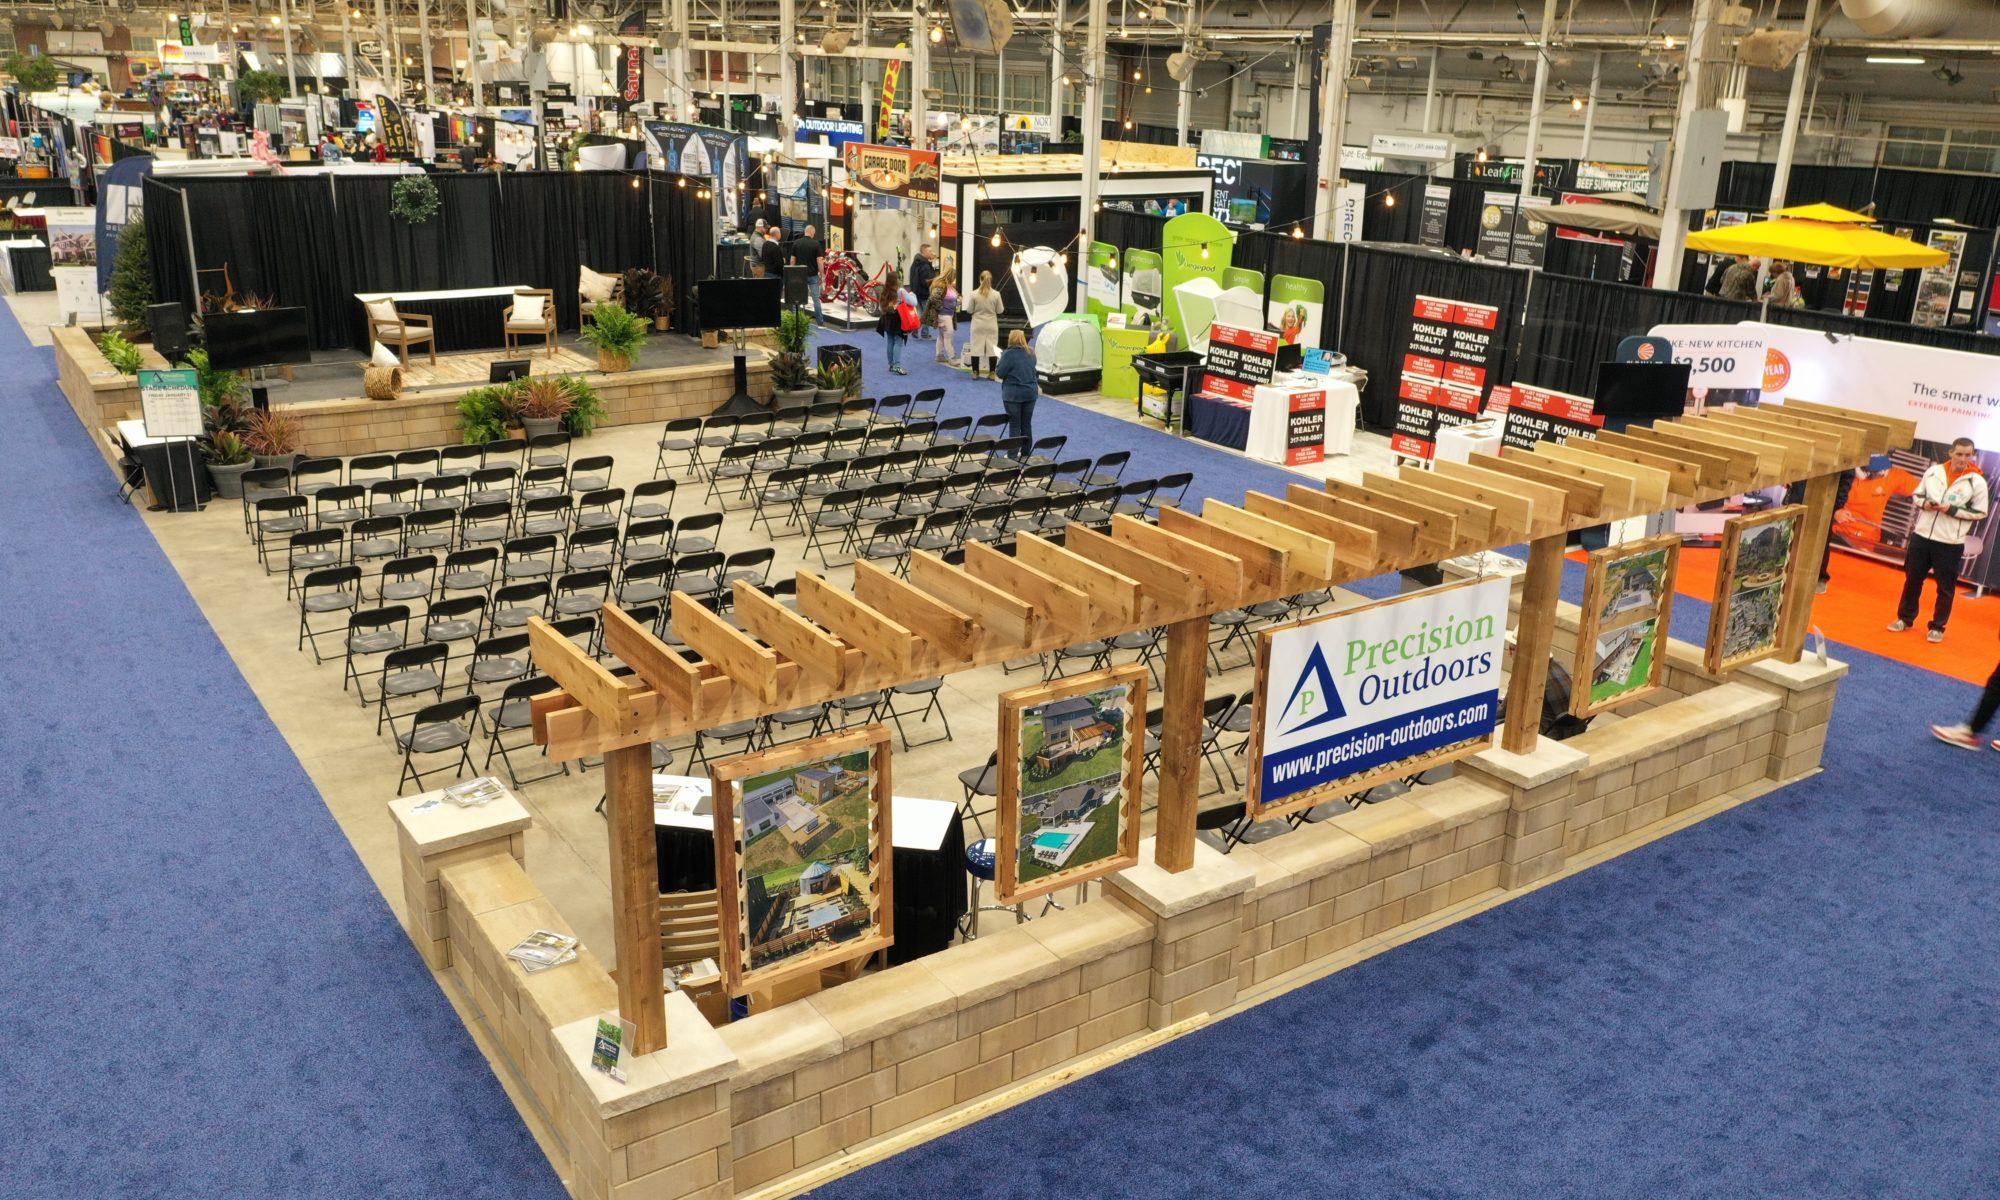 Indianapolis Home Show 2022 Precision Outdoors Live Stage Featured Garden Design build Landscaping Garden Structure Pergola Indiana Fair Grounds retaining wall arbor pergola privacy screens landscaping